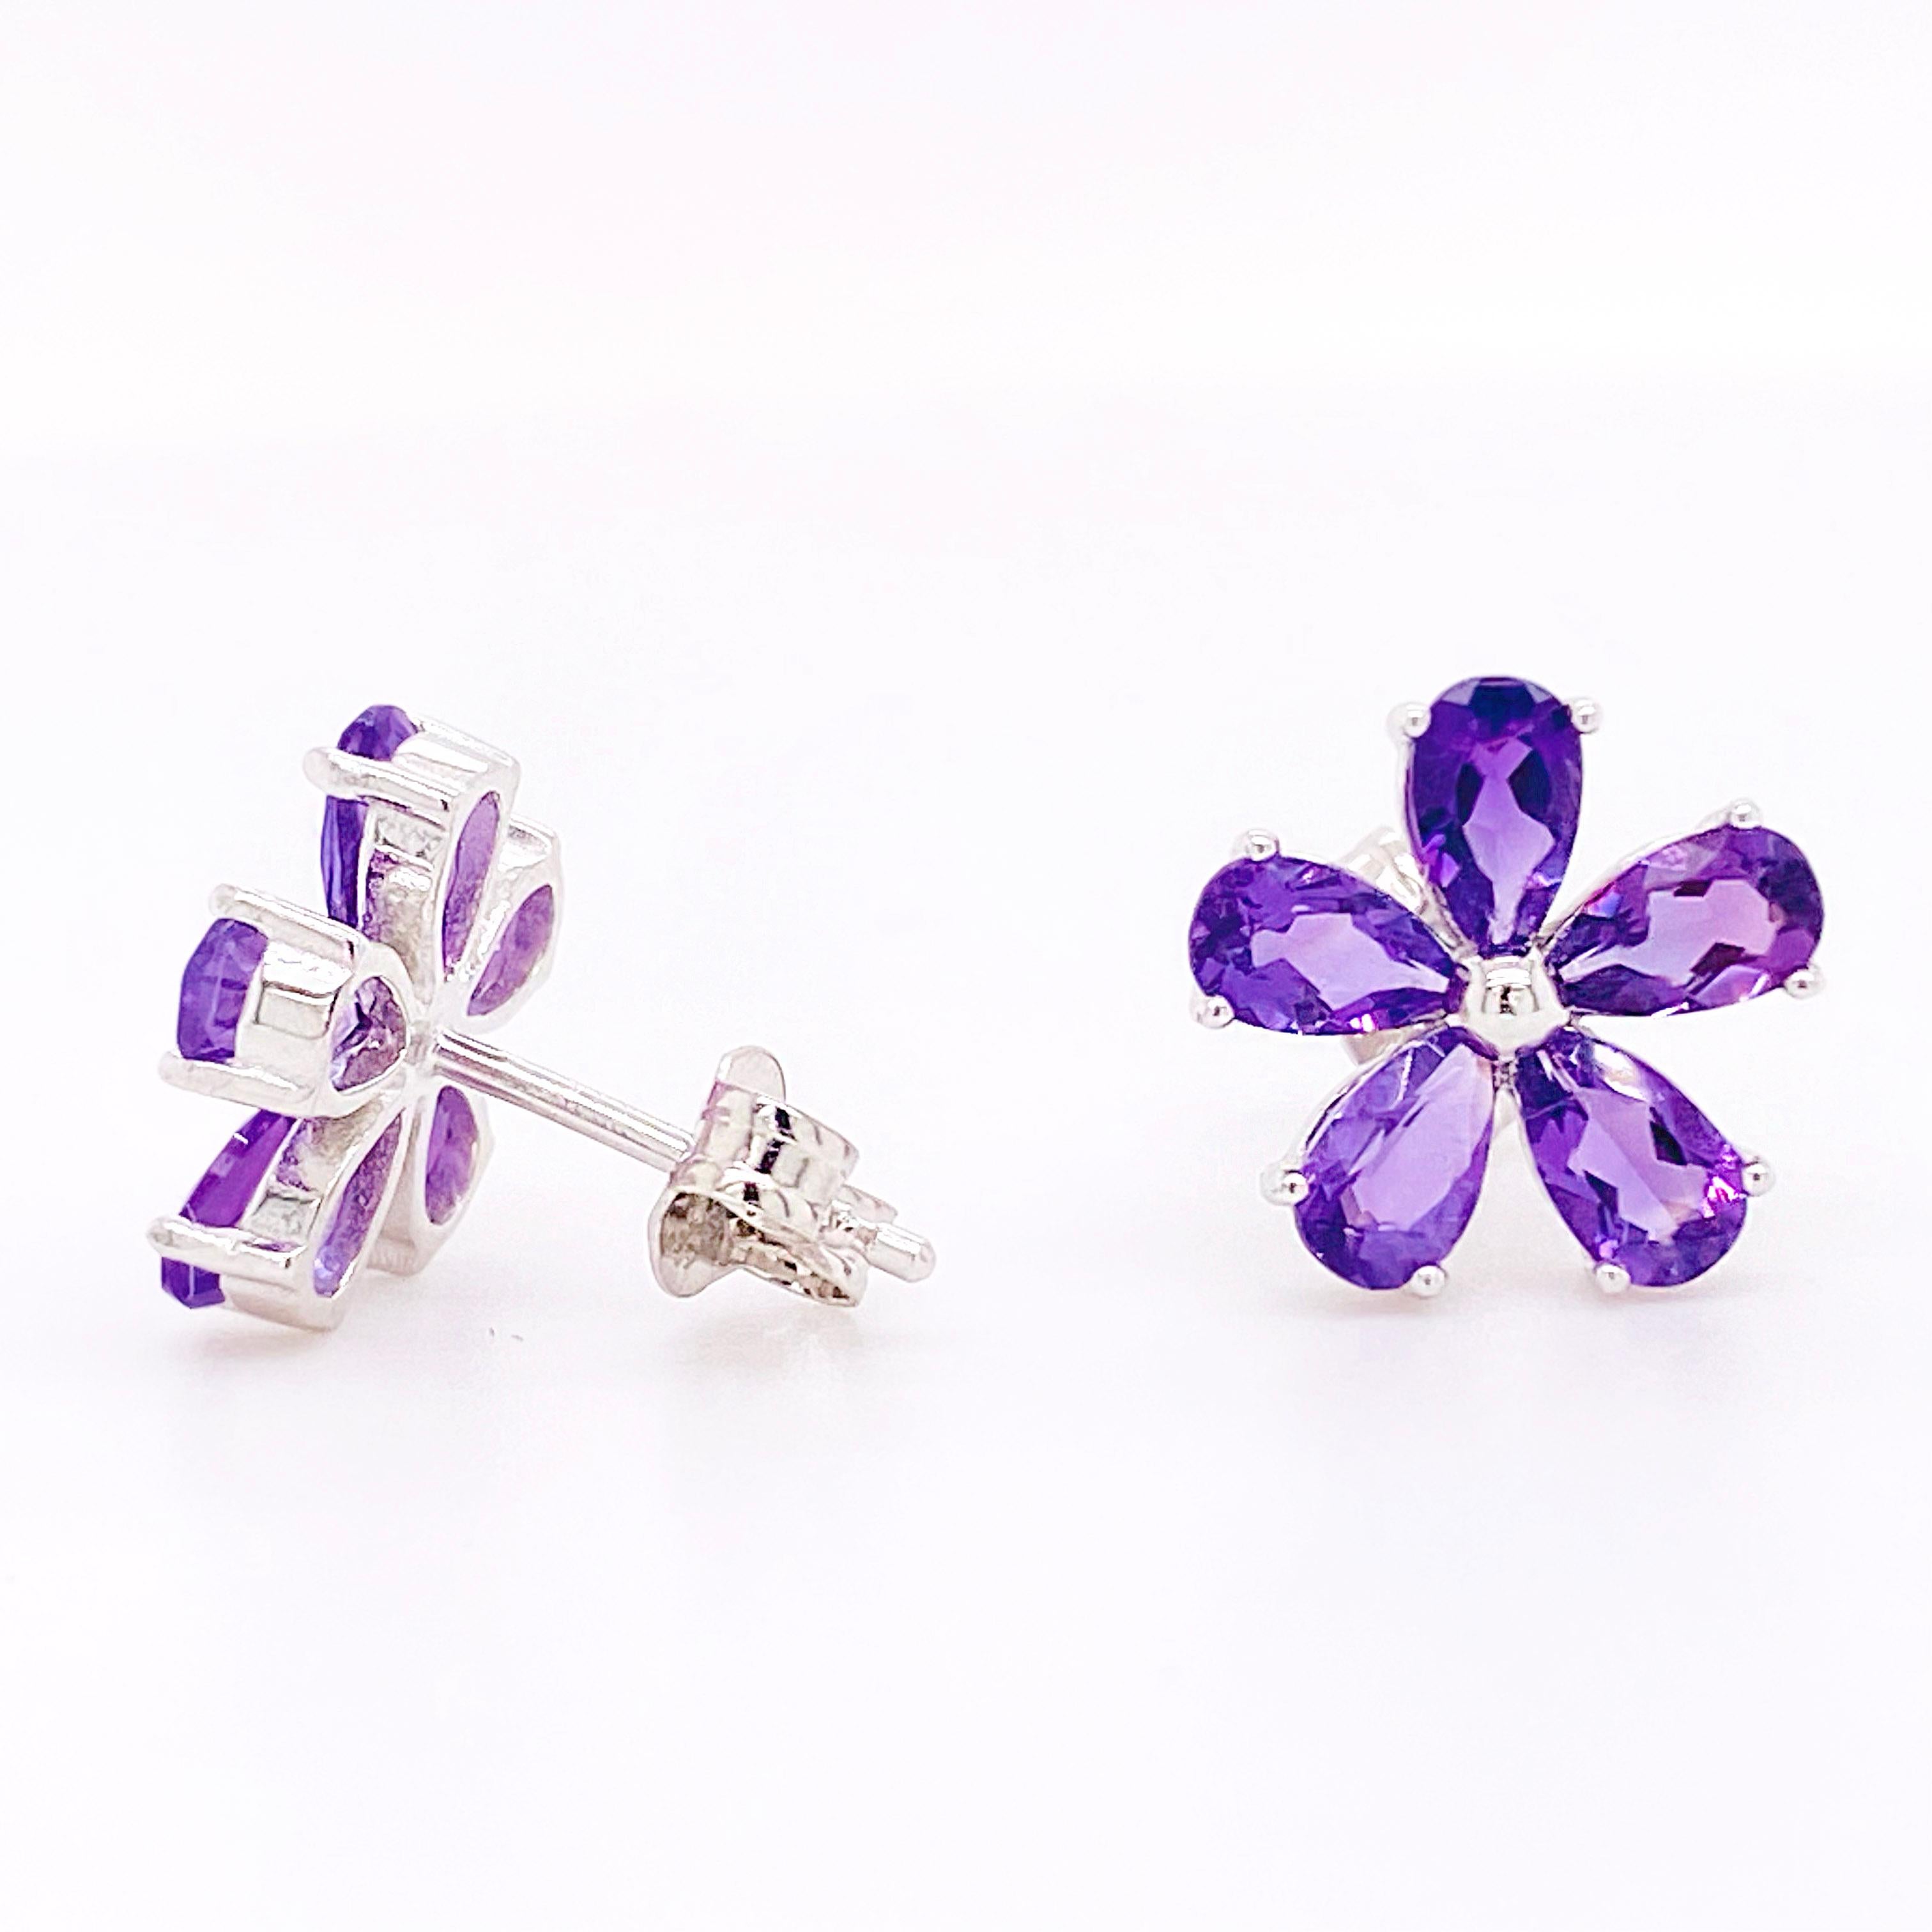 These amethyst flower earrings are perfect for anyone that loves bright and vibrant floral designs. The perfectly cut pear shaped amethysts sparkle brightly as they circle the center bright sphere of silver to form a five petal flower! The details